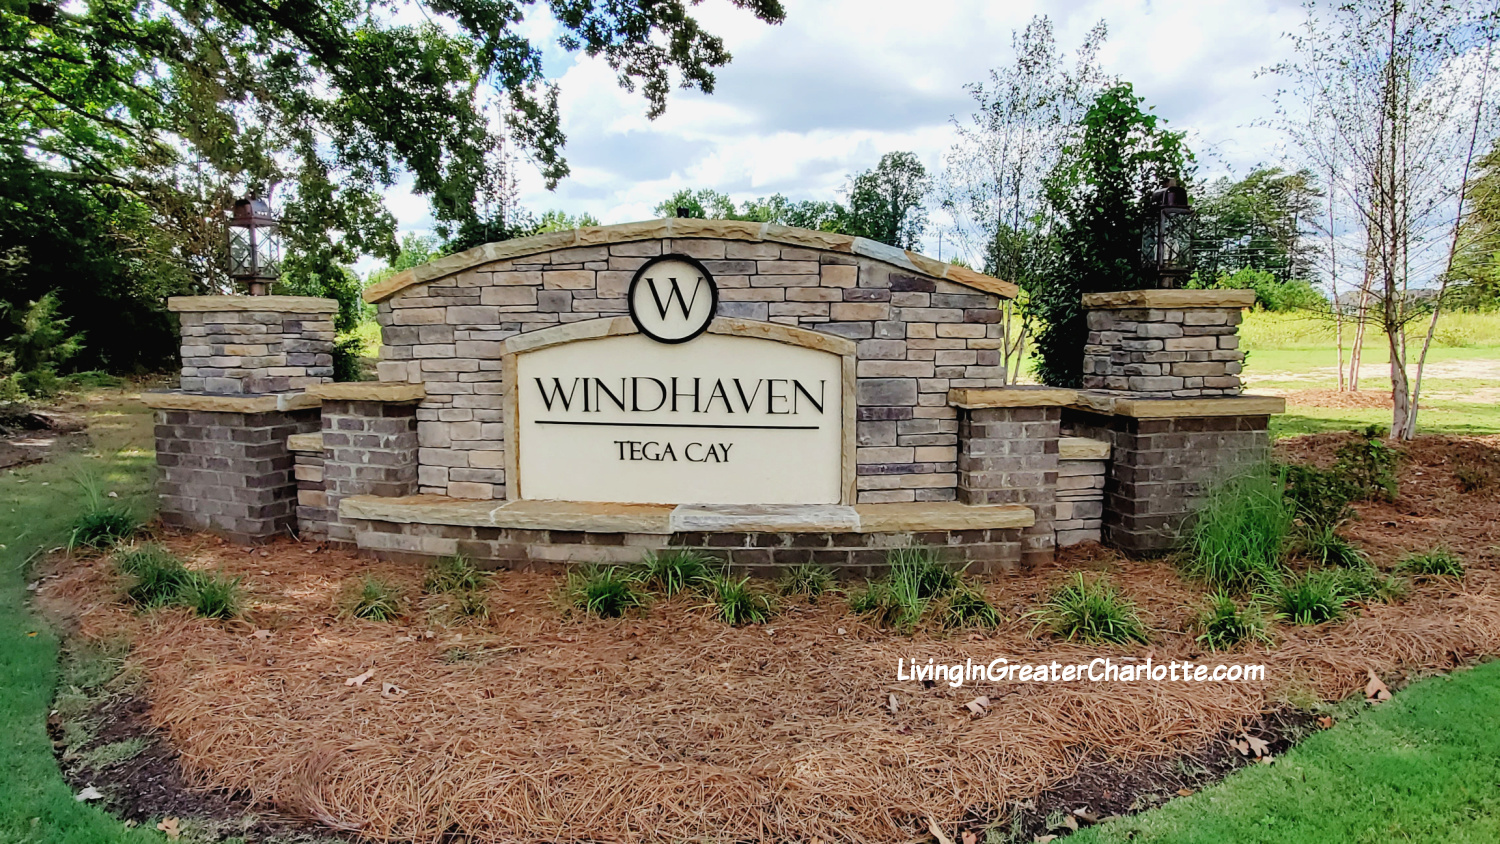 Windhaven in Tega Cay entrance monument